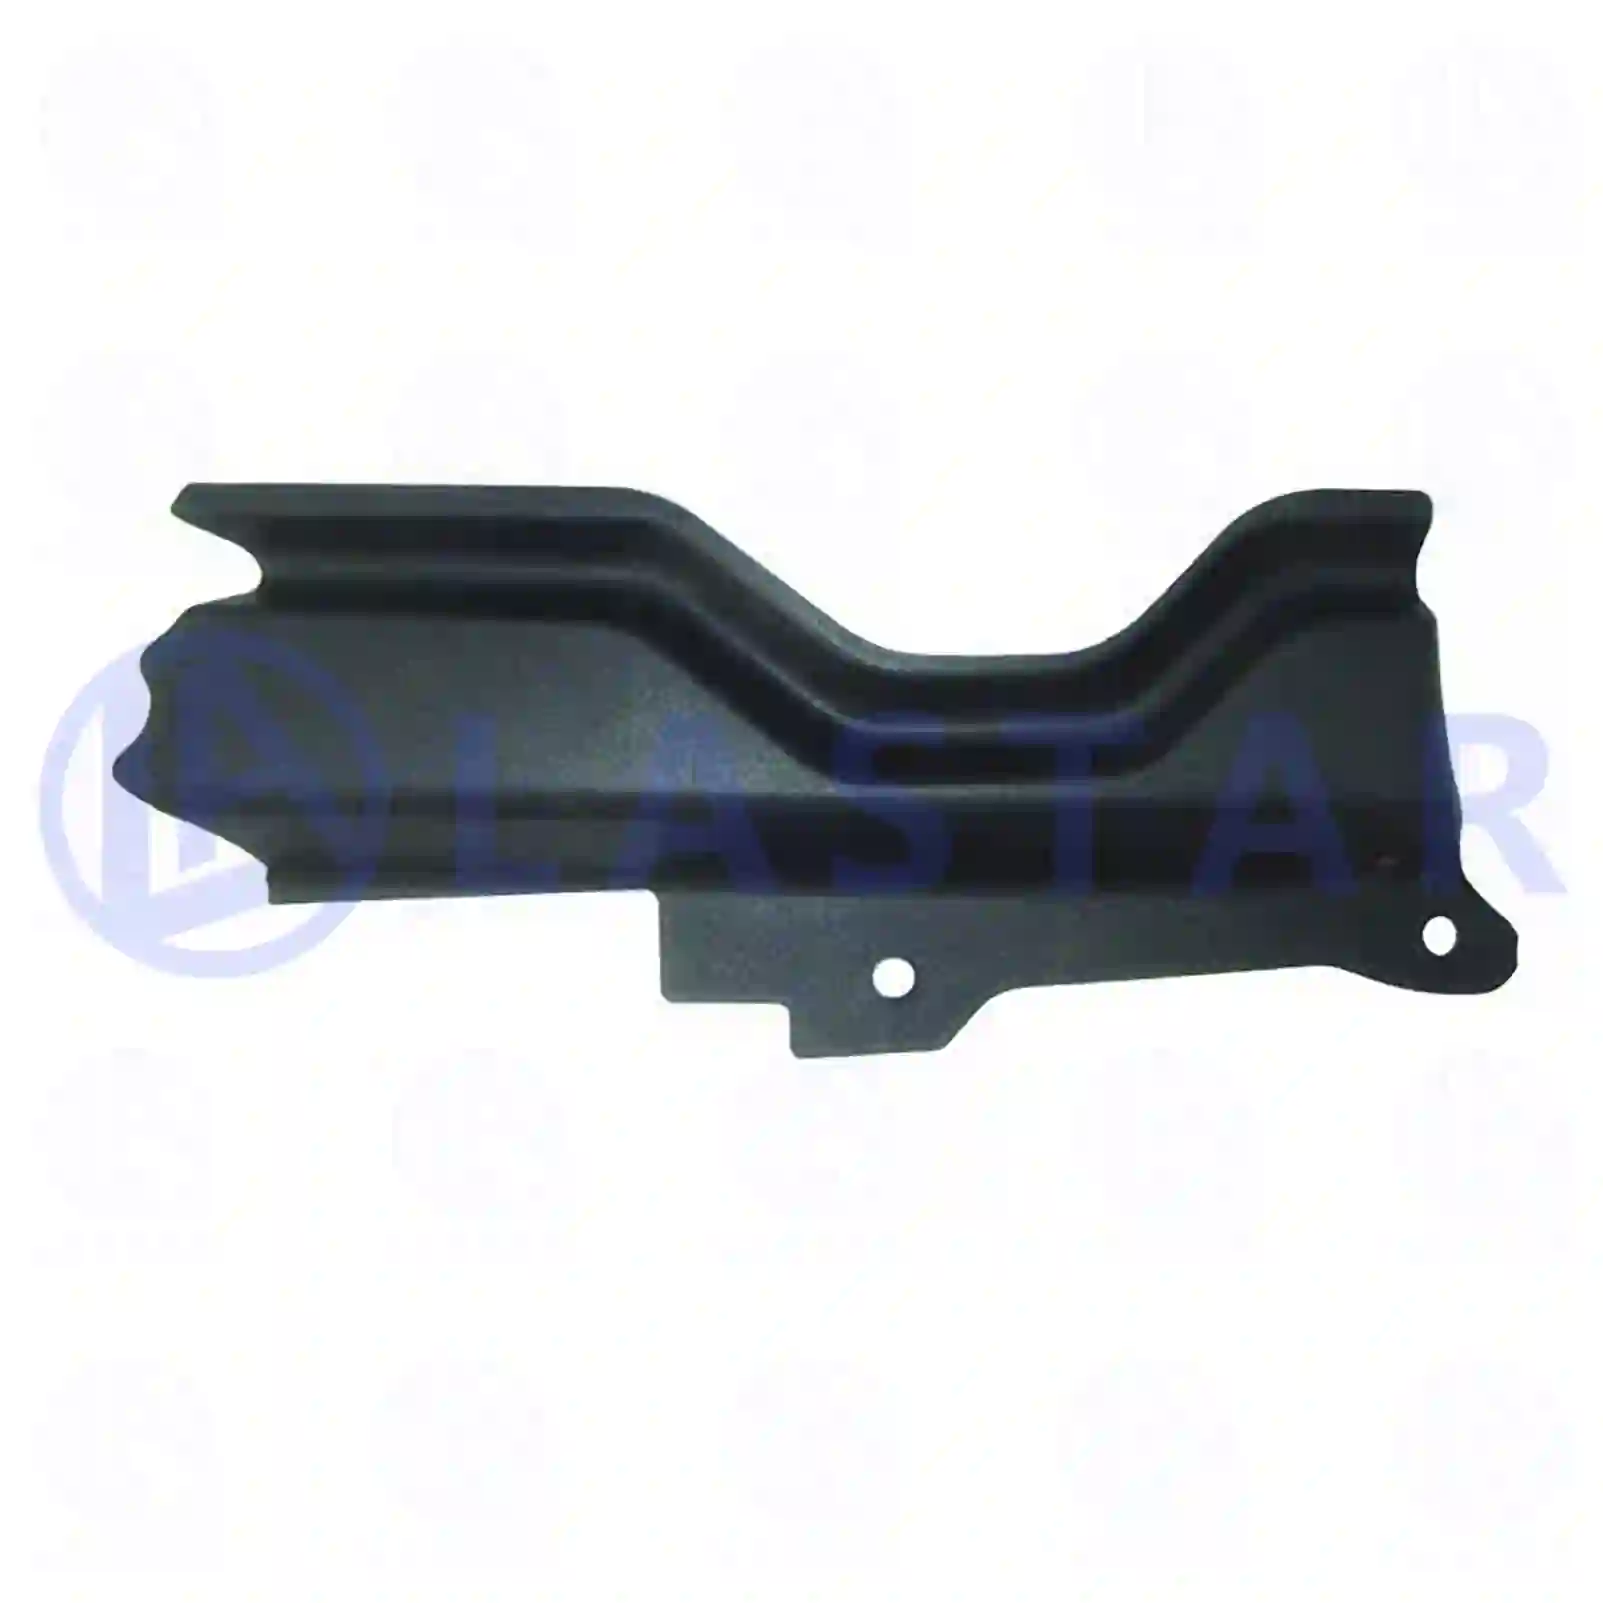 Cover, step, right, 77721656, 1529886, ZG60506-0008 ||  77721656 Lastar Spare Part | Truck Spare Parts, Auotomotive Spare Parts Cover, step, right, 77721656, 1529886, ZG60506-0008 ||  77721656 Lastar Spare Part | Truck Spare Parts, Auotomotive Spare Parts